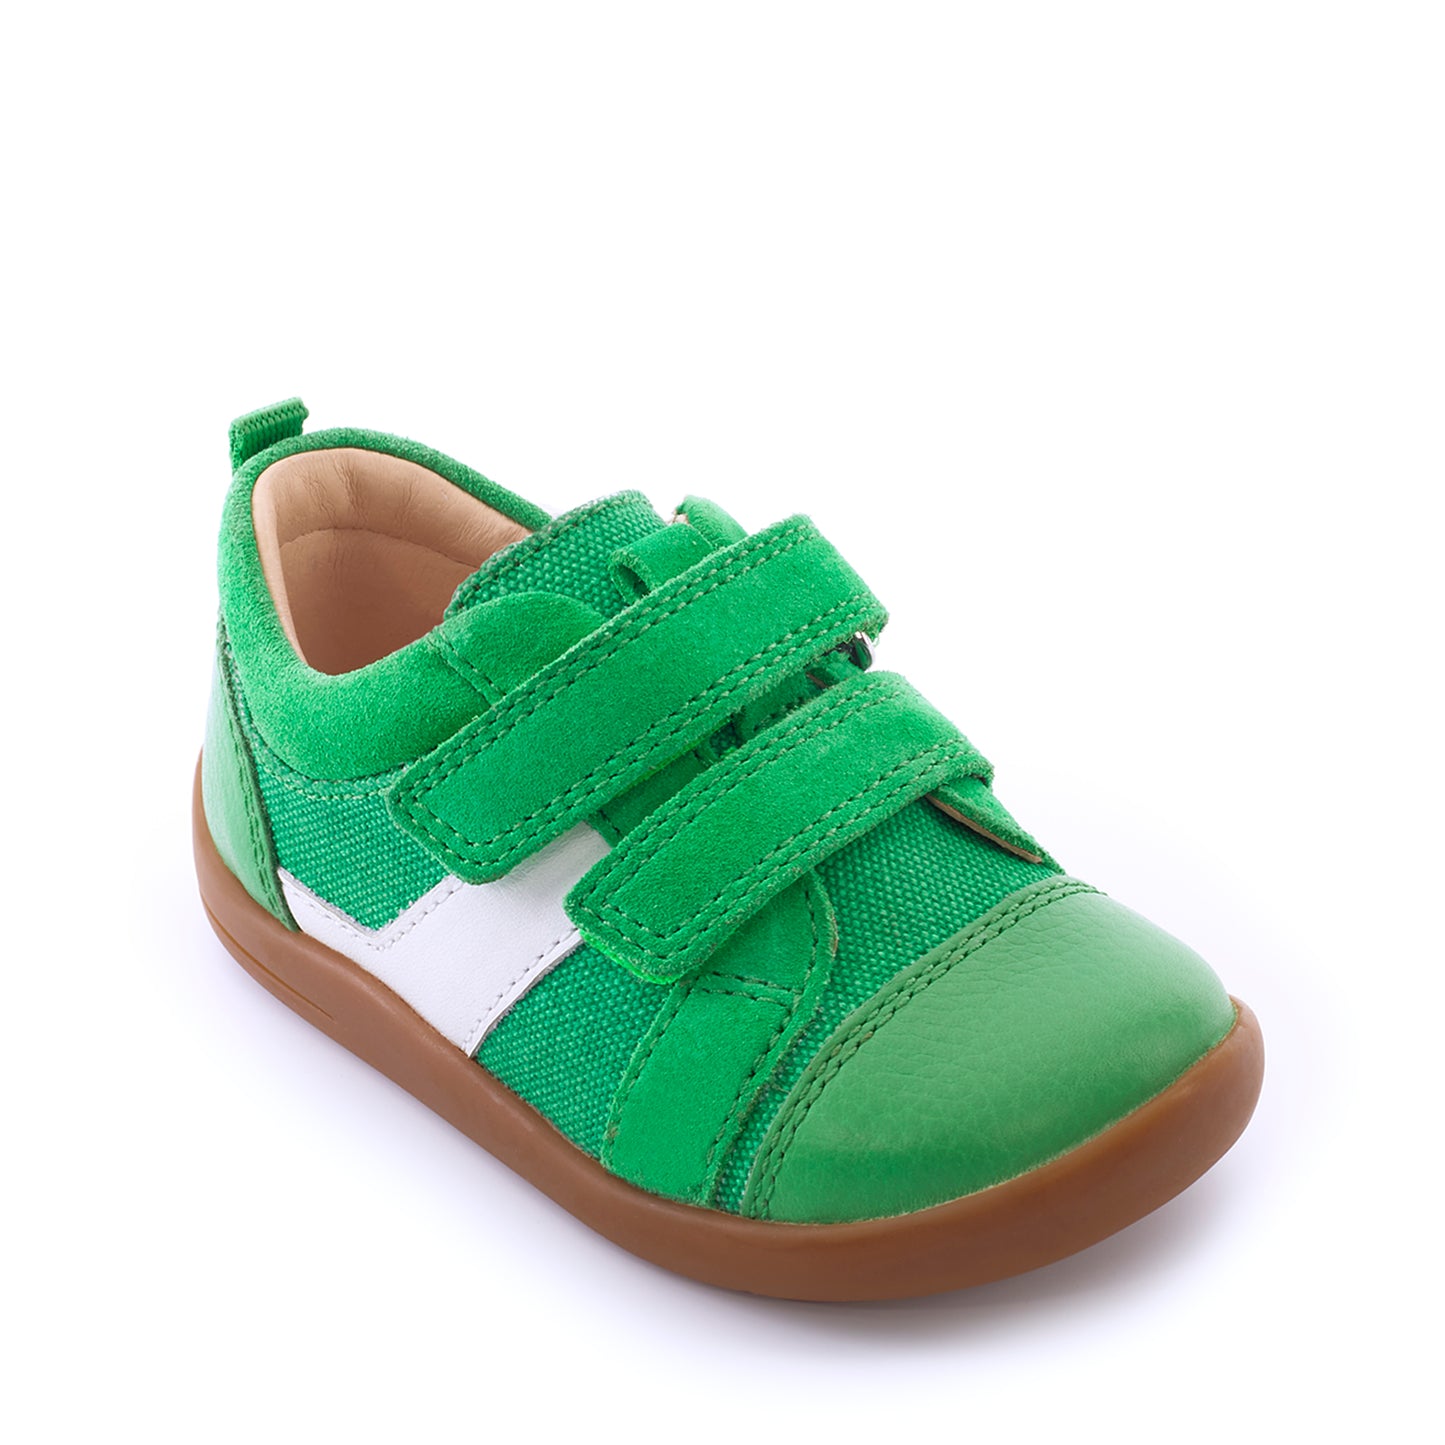 A boys casual shoe by Start Rite, style Maze, in green and white with double velcro fastening. Right side view. Angled view.